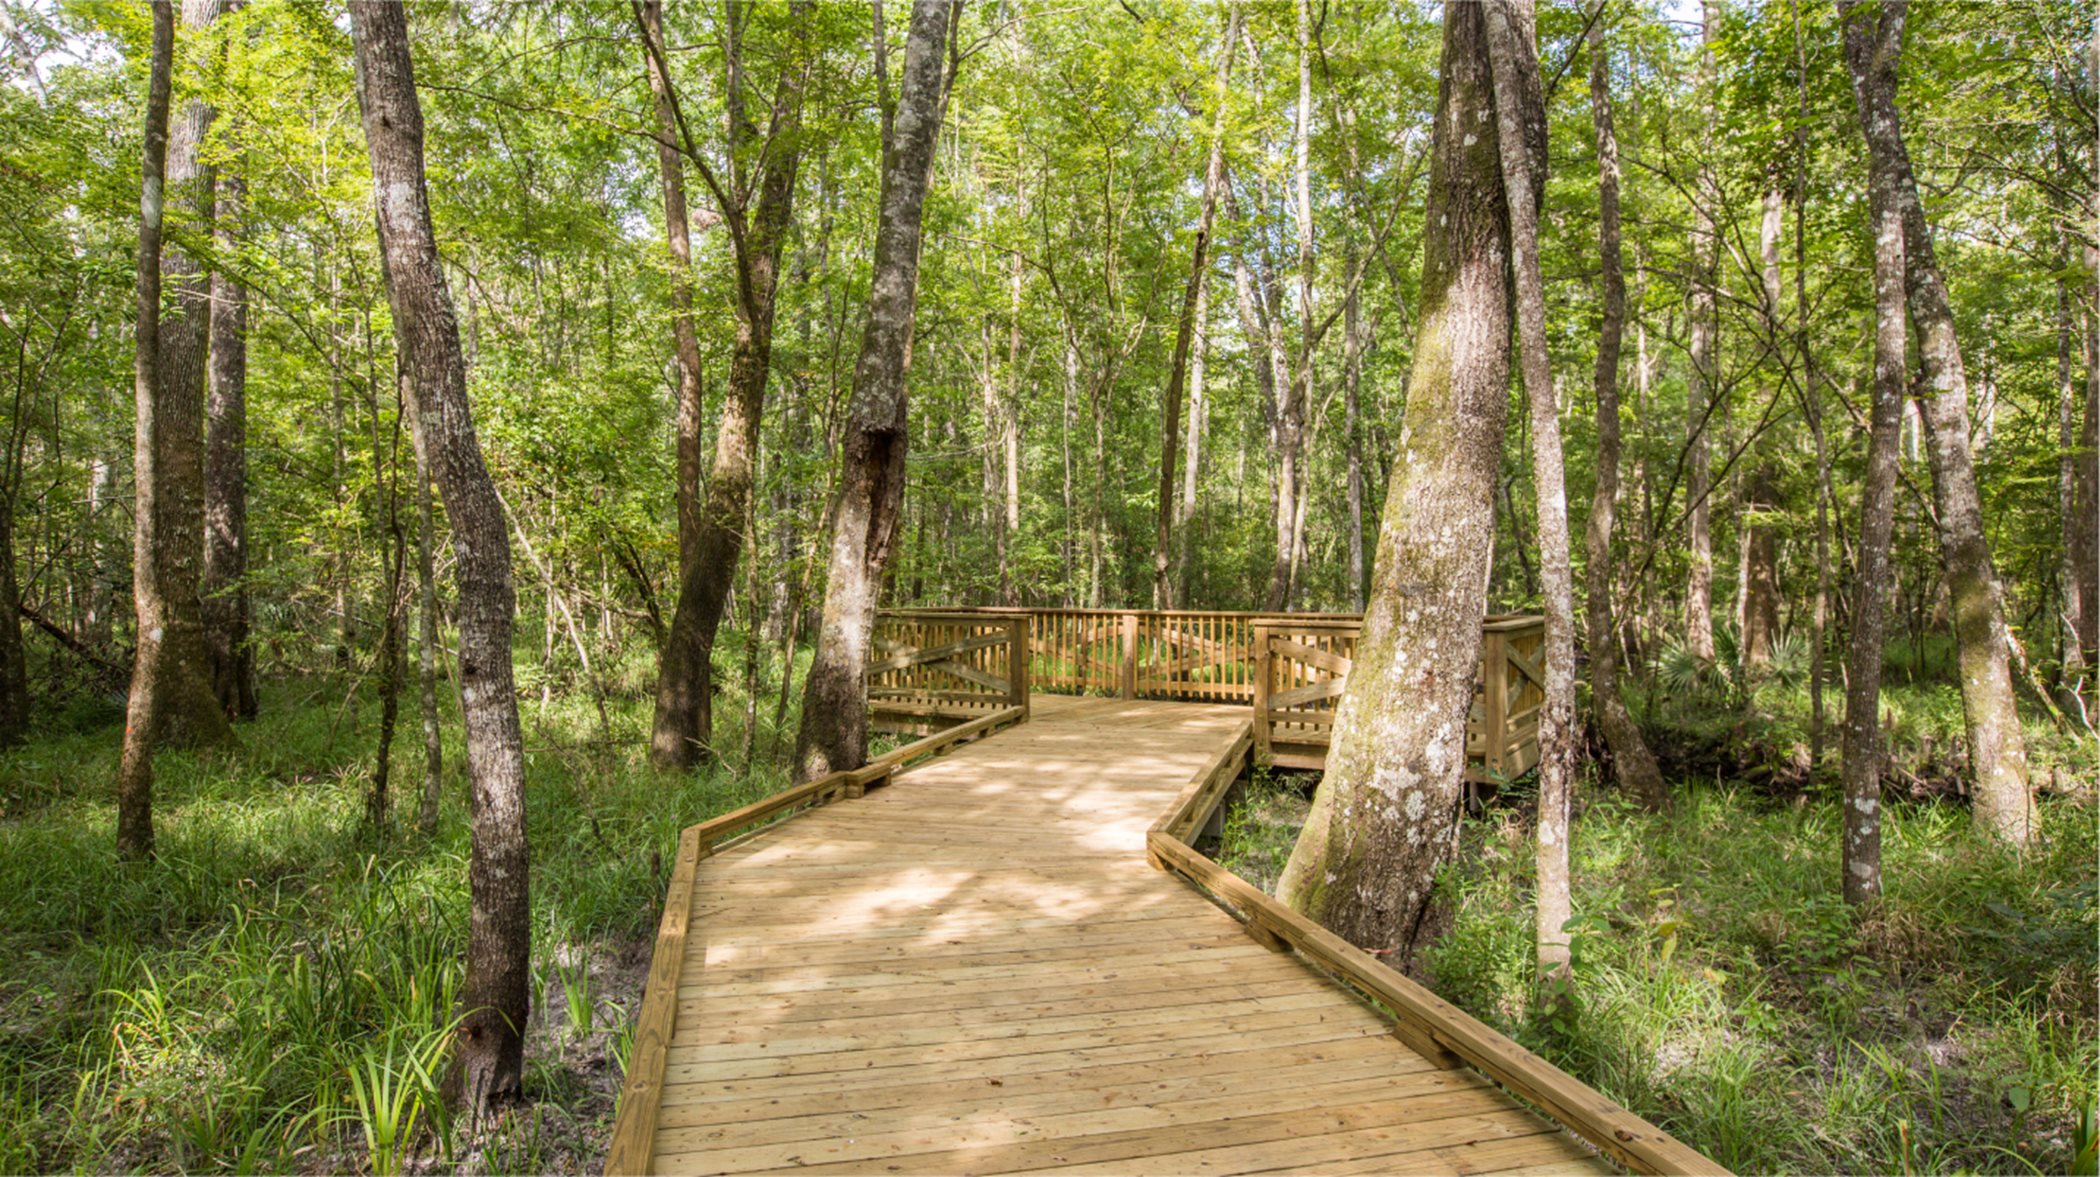 Boardwalk extending into a trail surrounded by trees